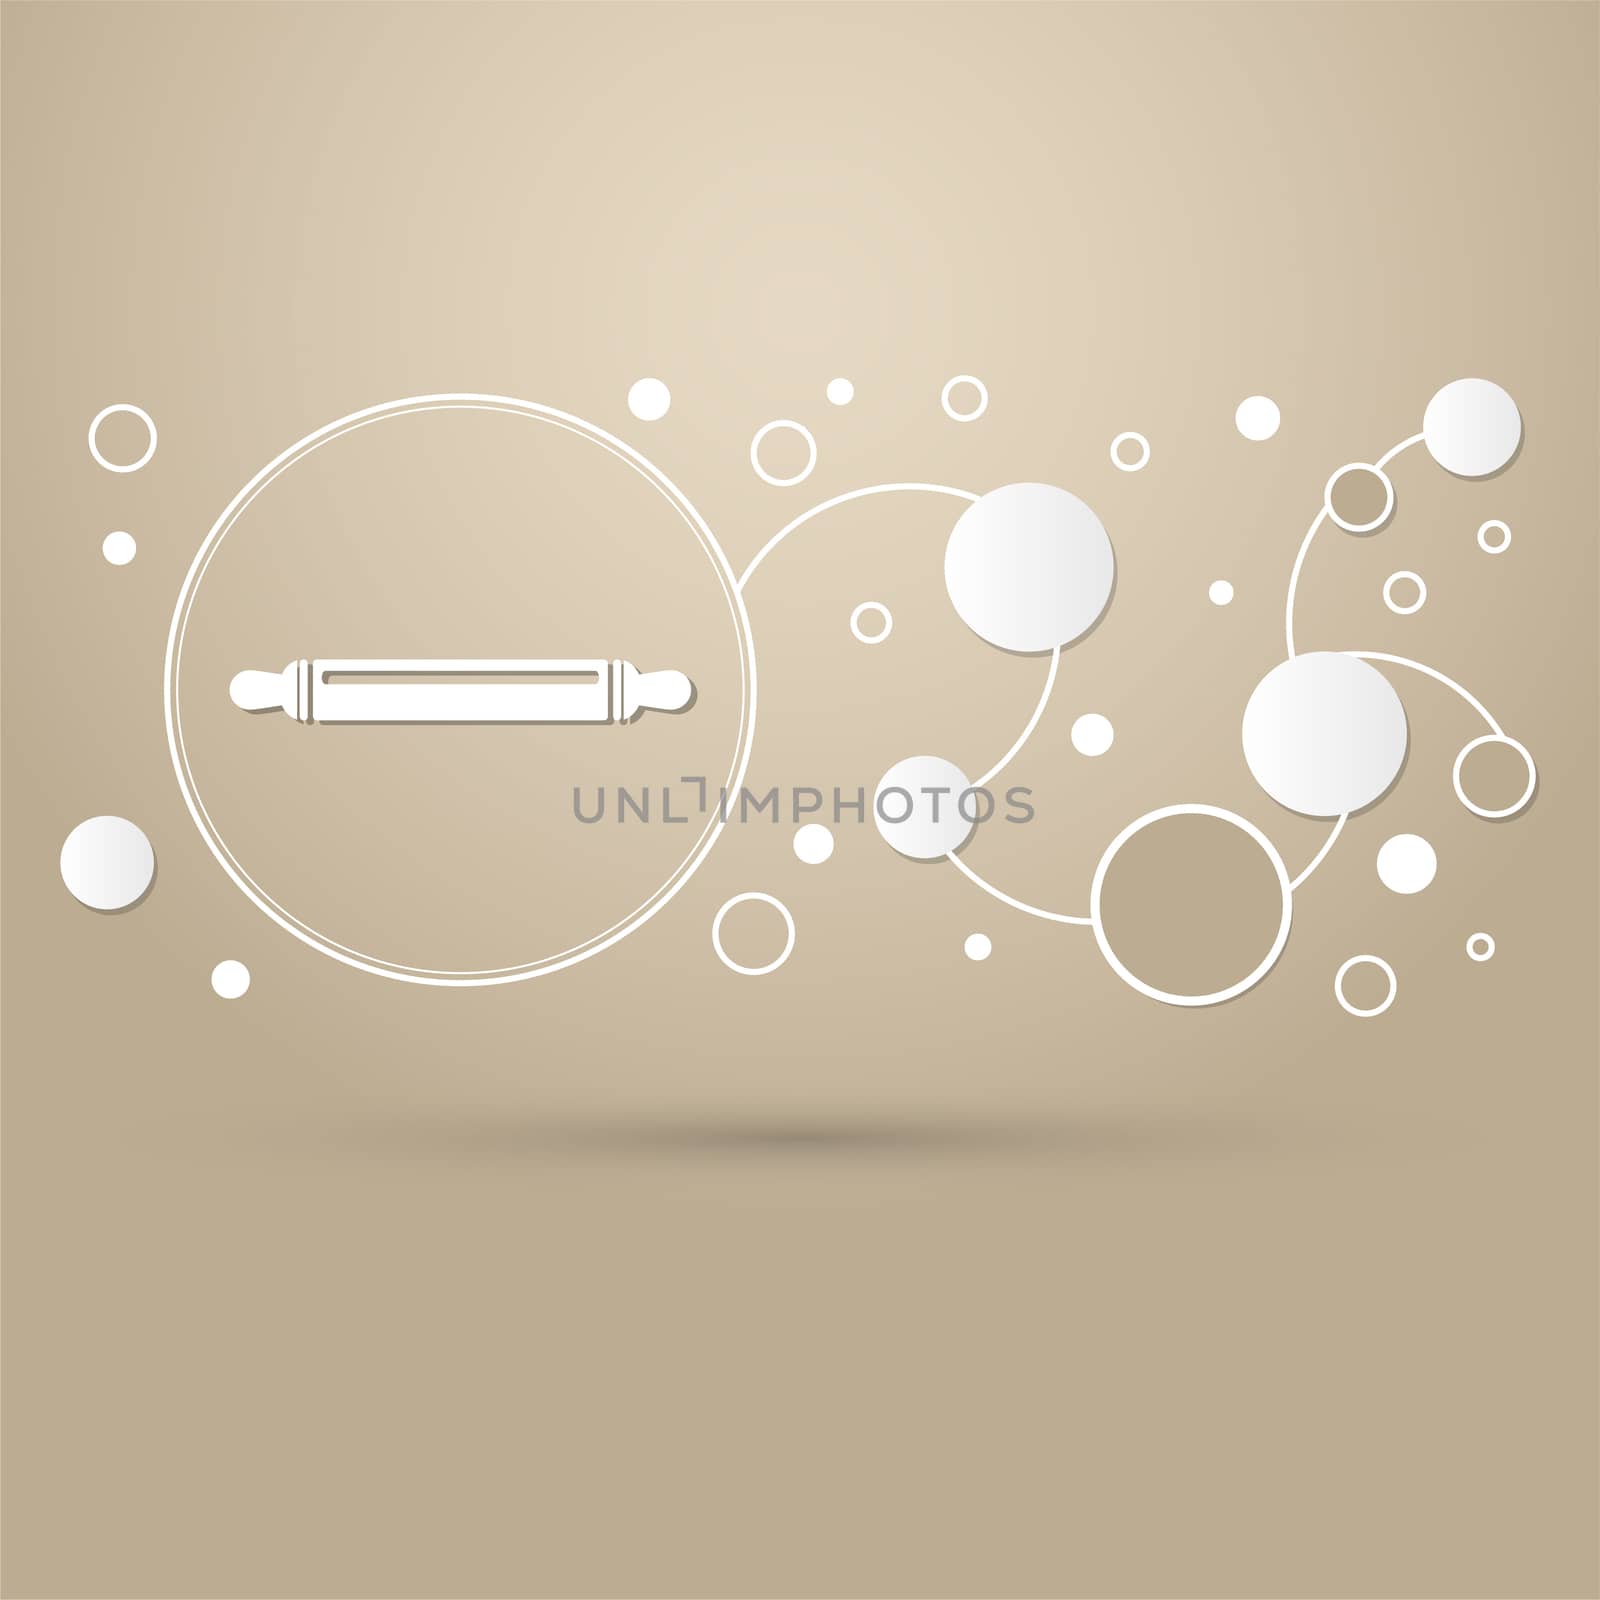 Roller, flour icon on a brown background with elegant style and modern design infographic.  by Adamchuk